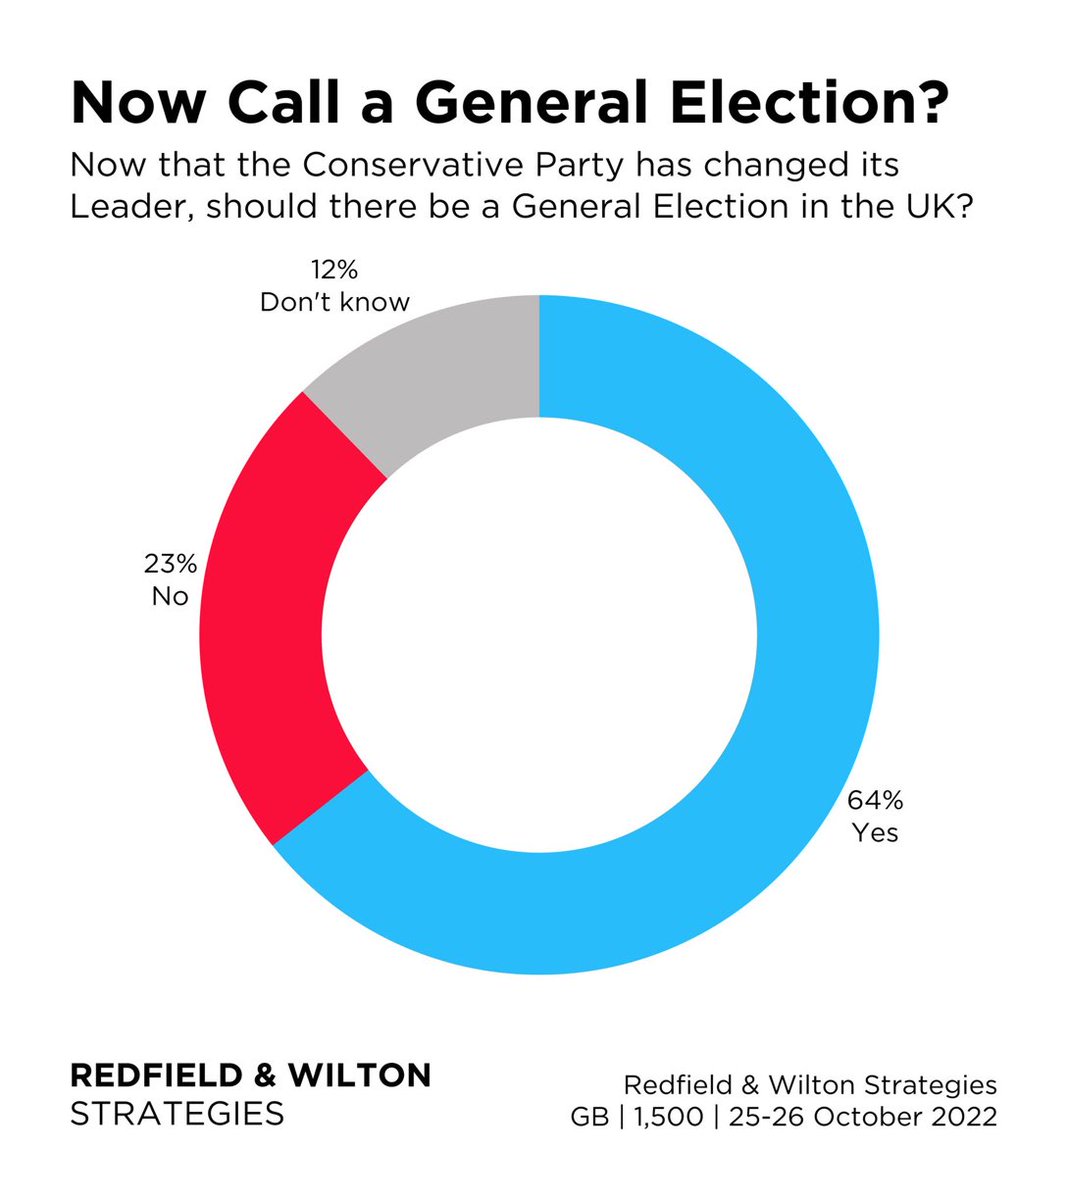 Looks pretty clear to me….Call a General Election now!